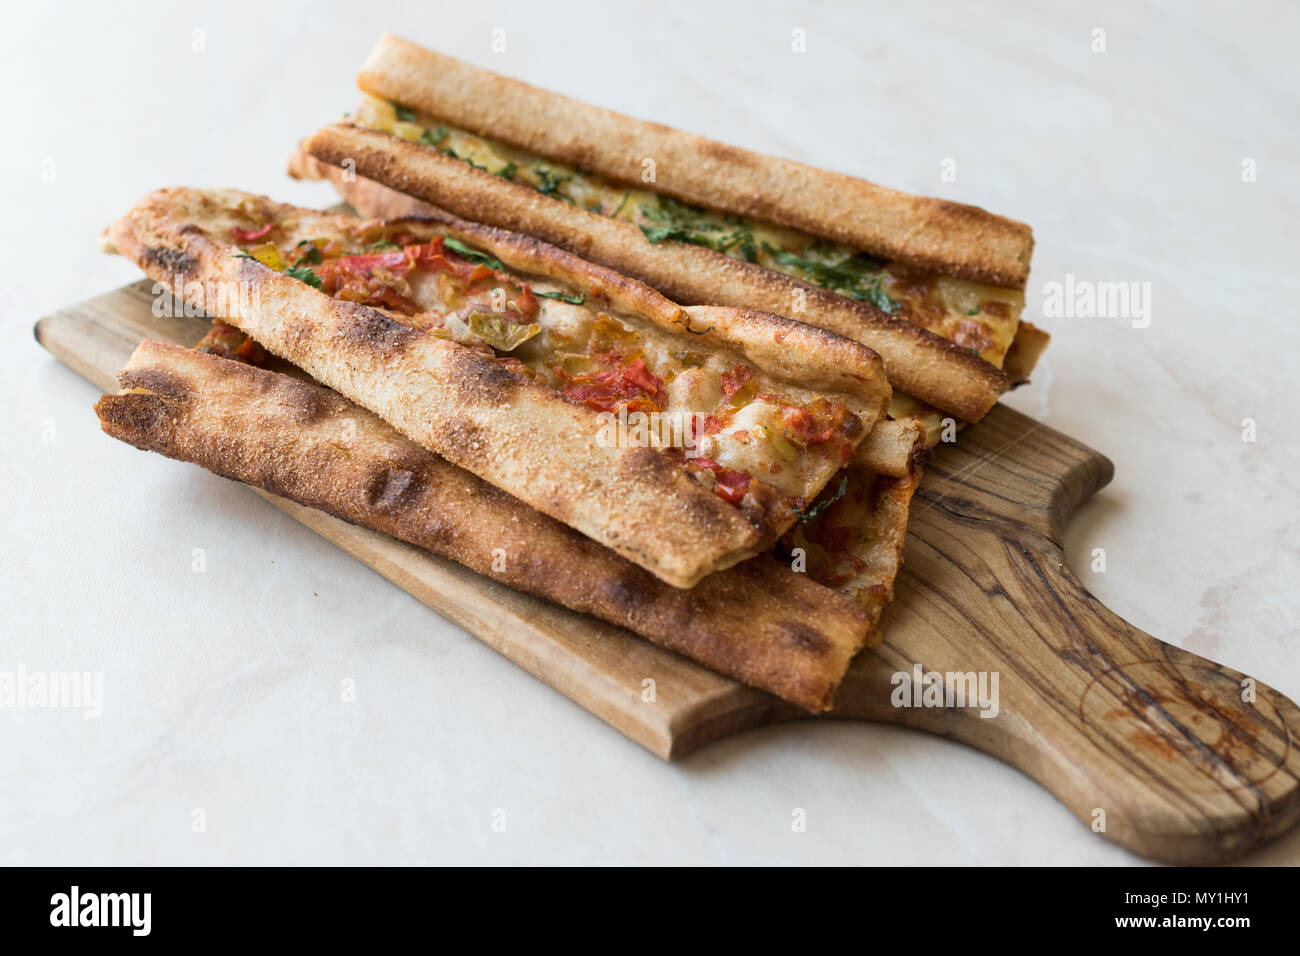 Turkish Pastry Konya Mevlana Pide with Cubed Meat and Melted Cheese. Traditional Food. Stock Photo